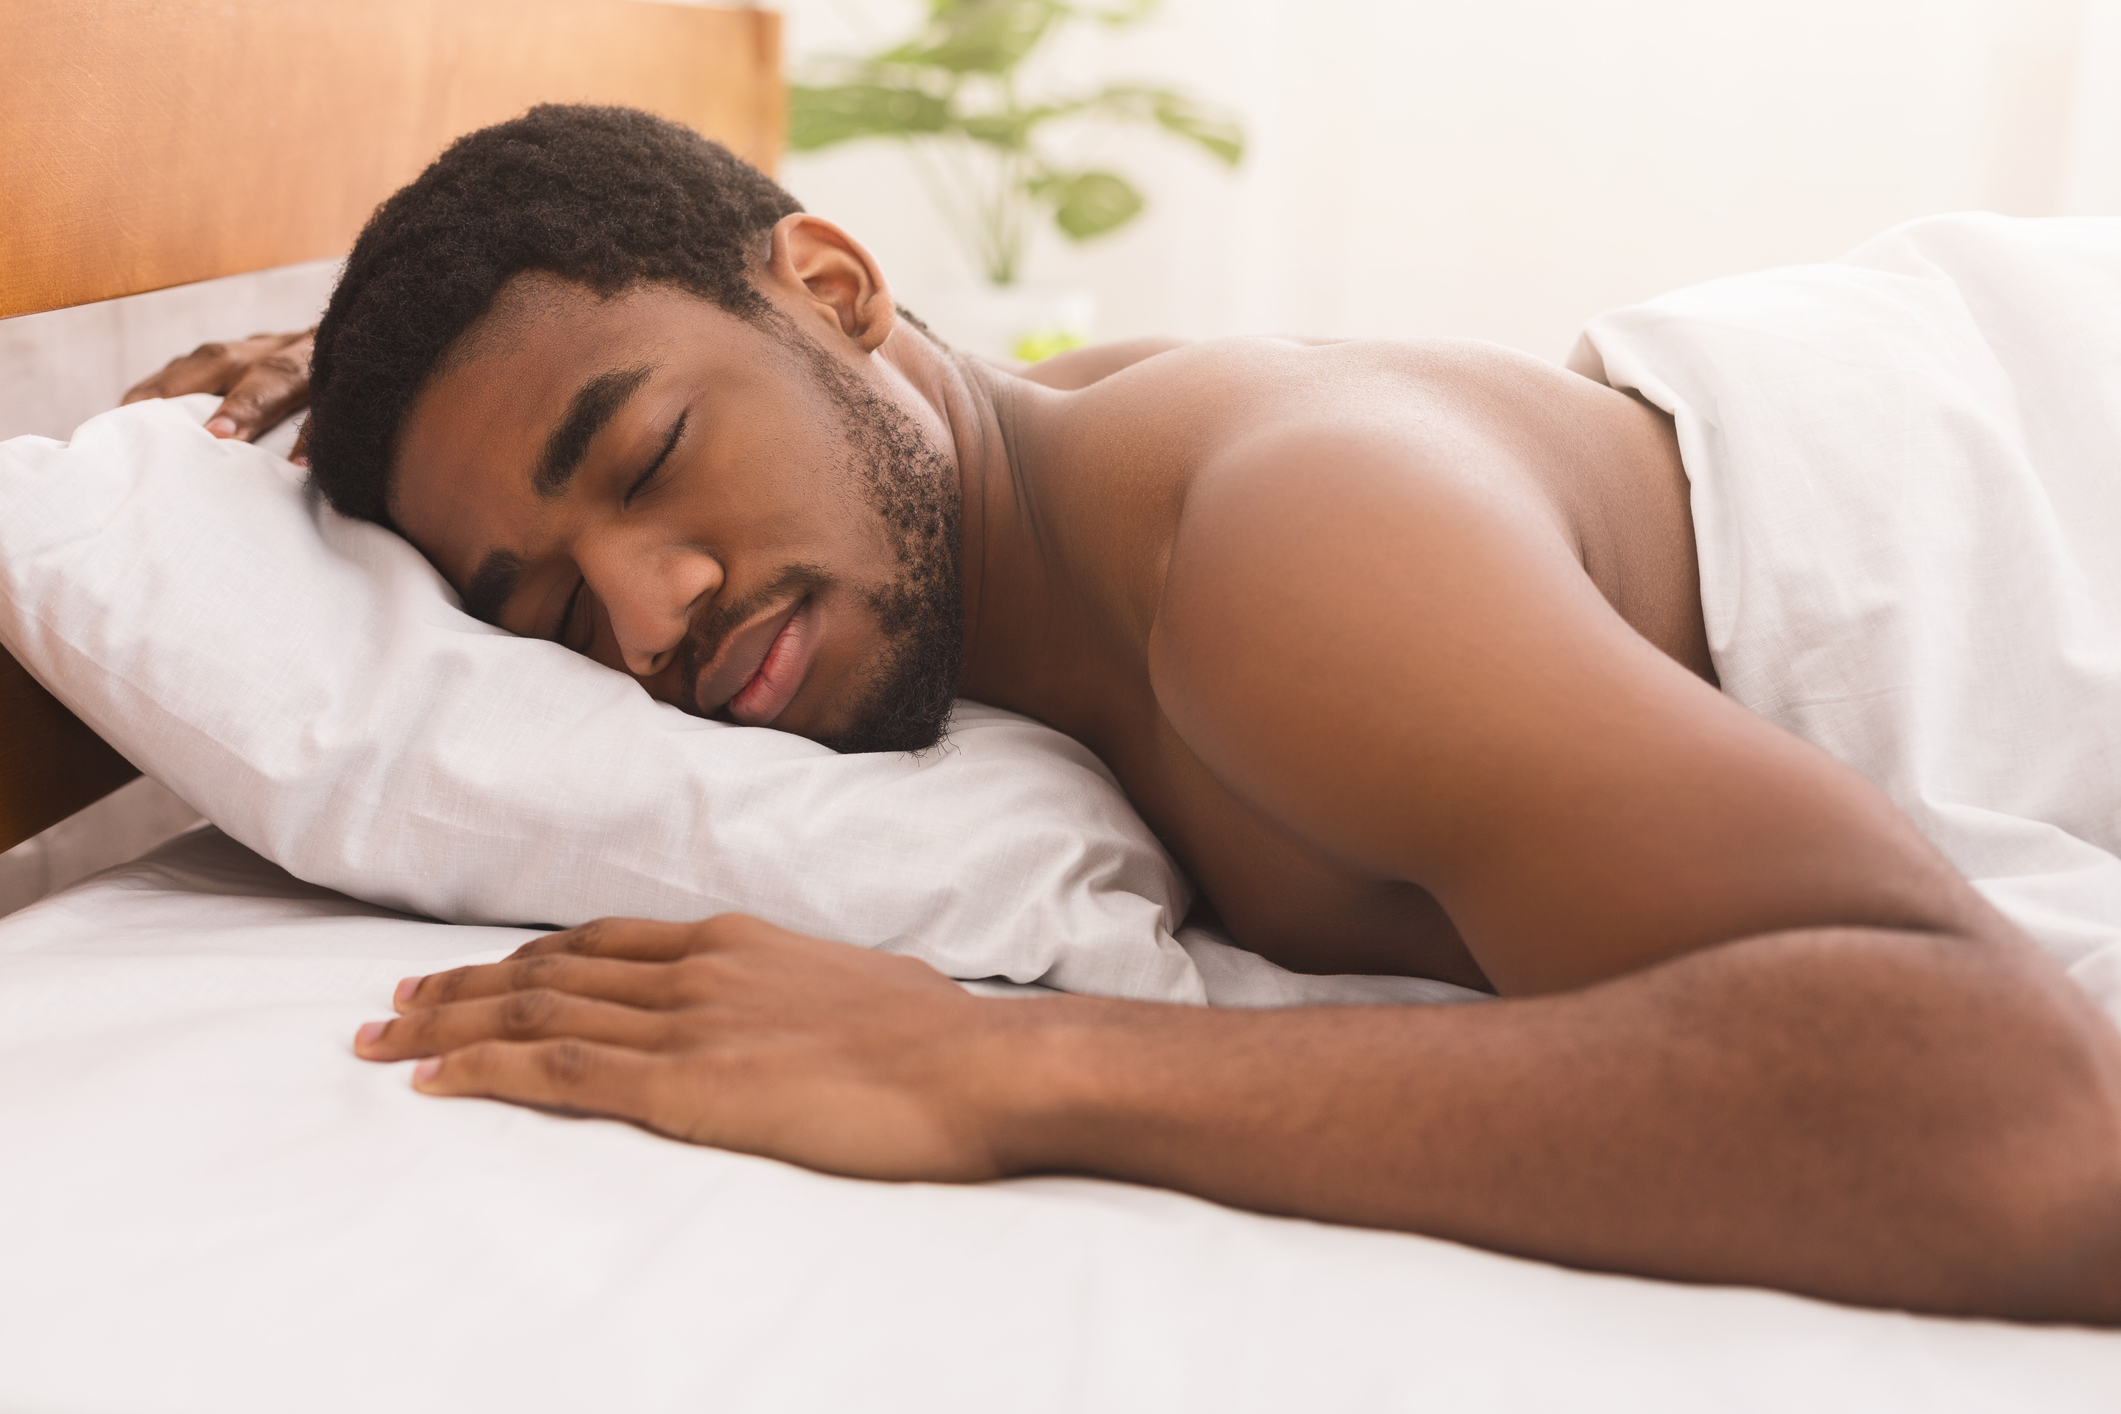 Force Sex While Sleeping - Is Sleeping Naked Better for Your Health? | Sleep Foundation